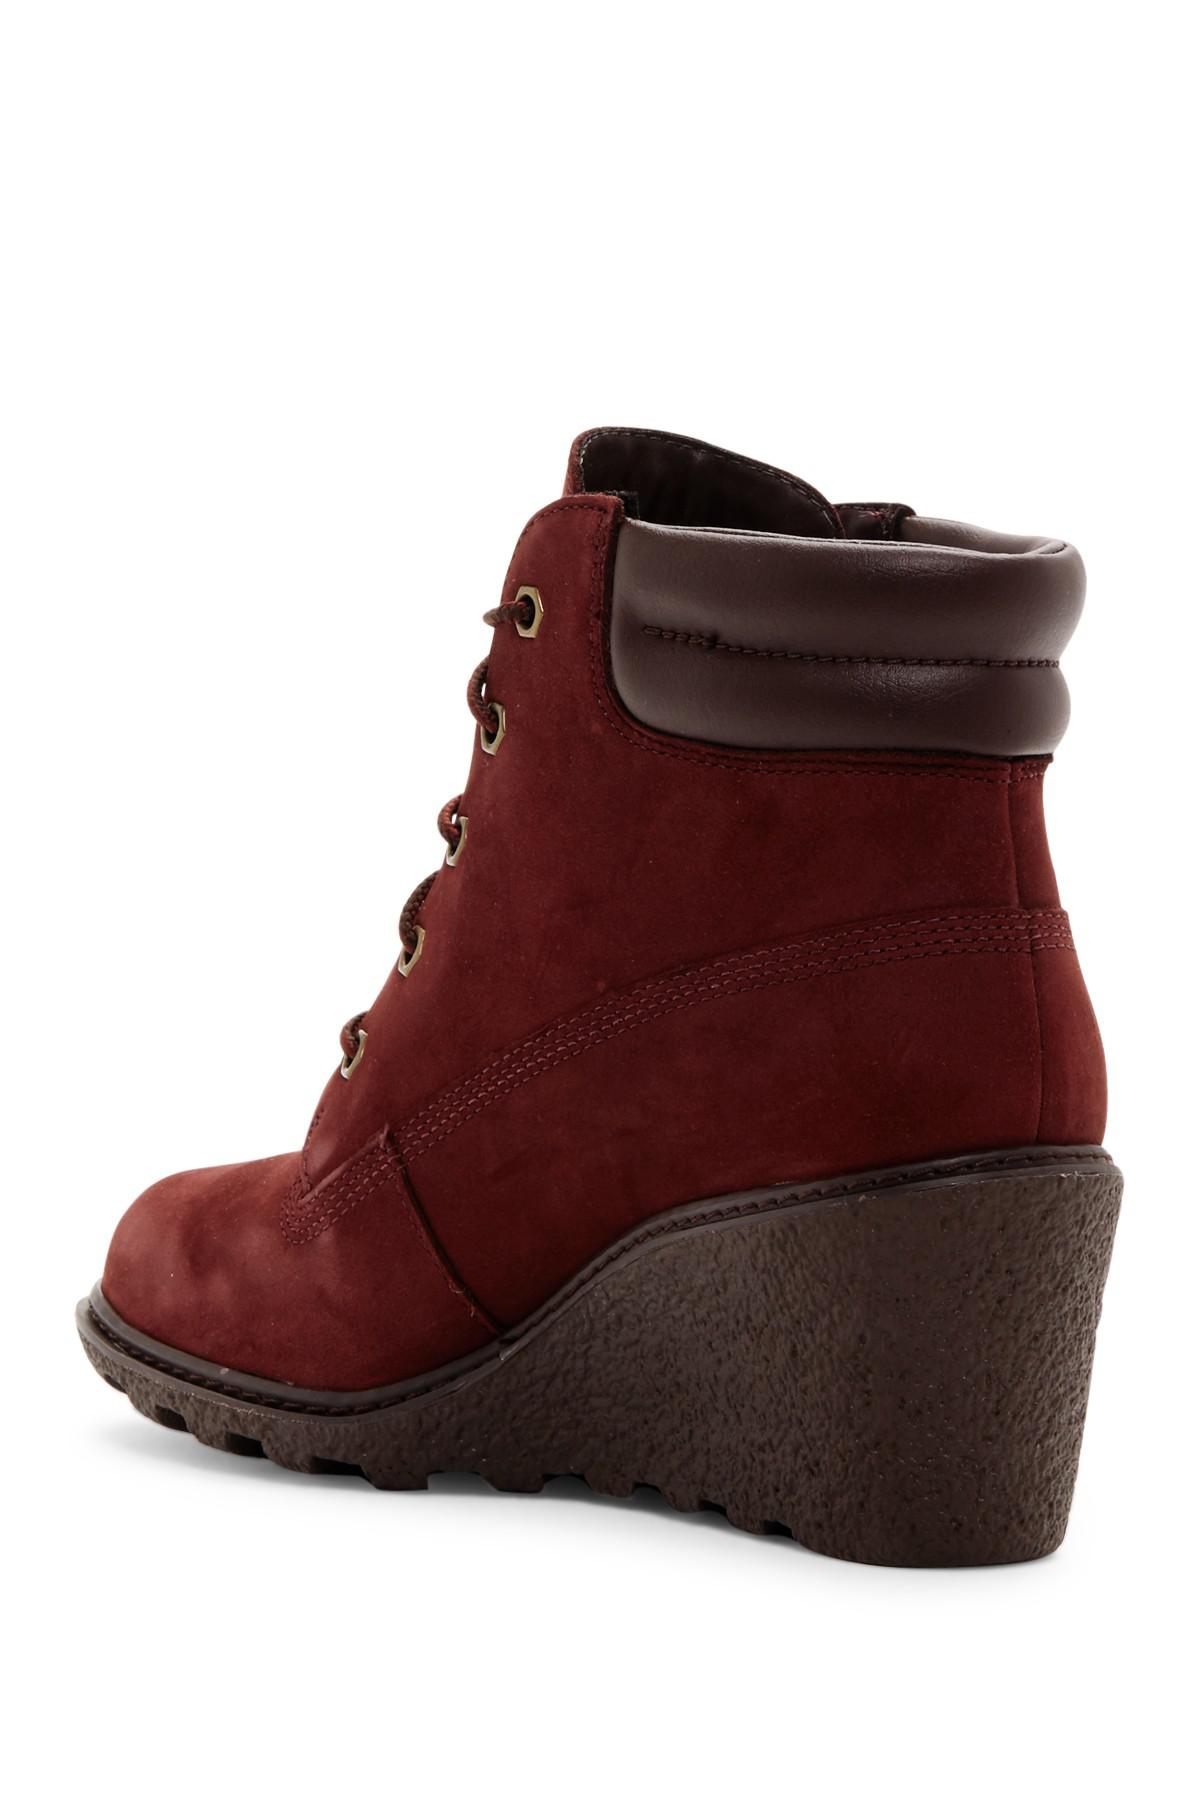 Timberland Leather Amston Wedge Boot in Red - Lyst